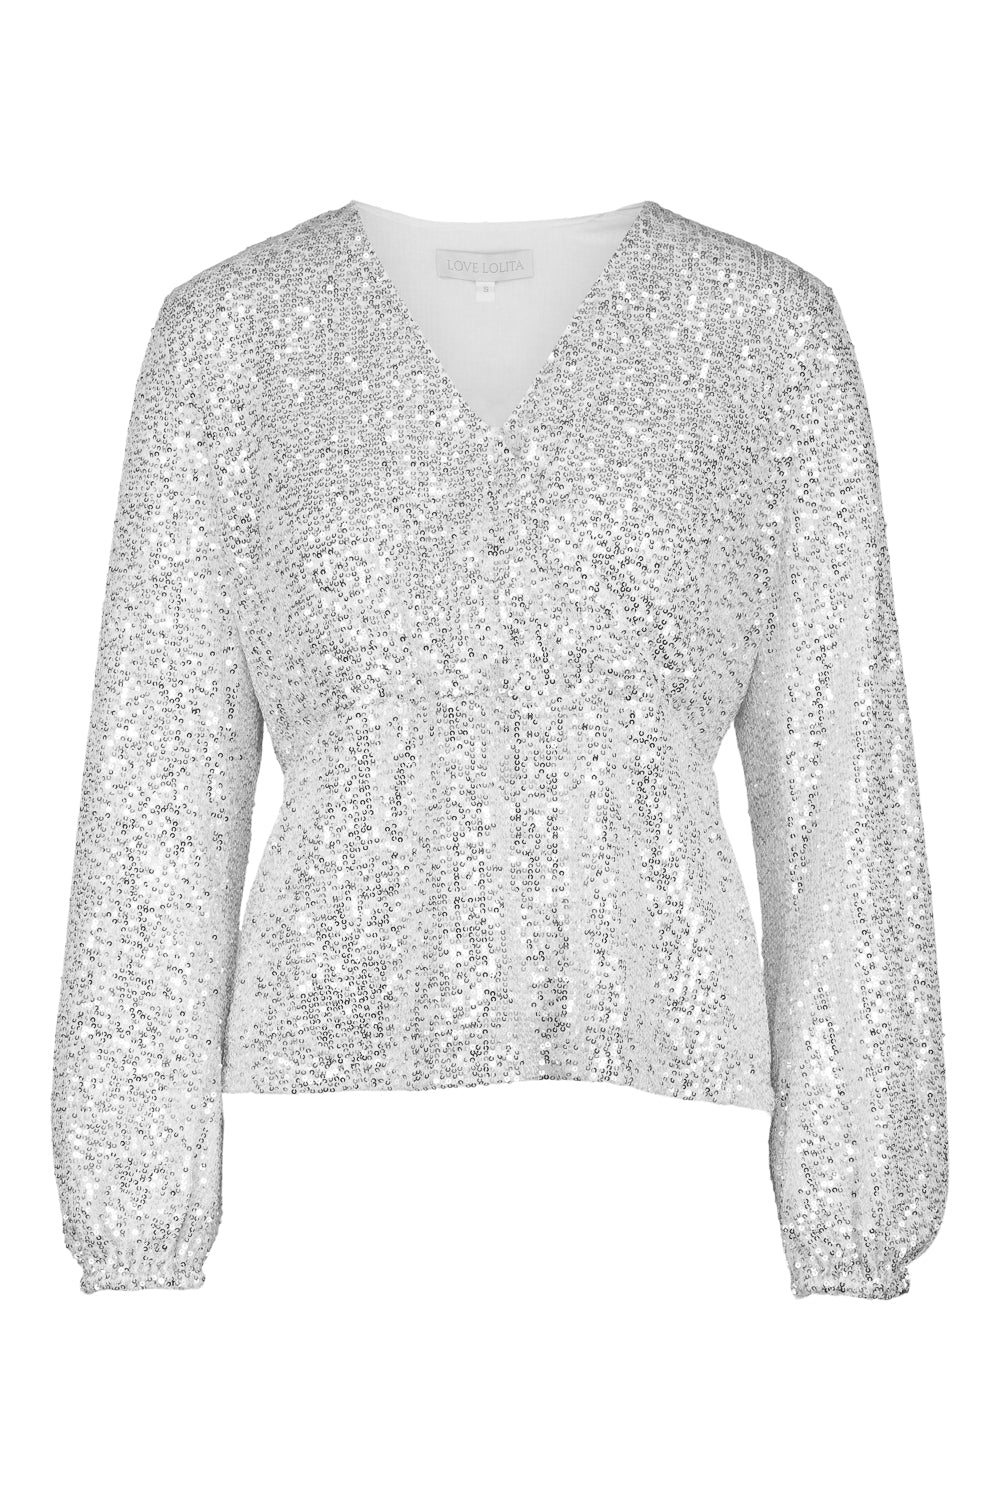 Adeline Blouse Silver Sequins